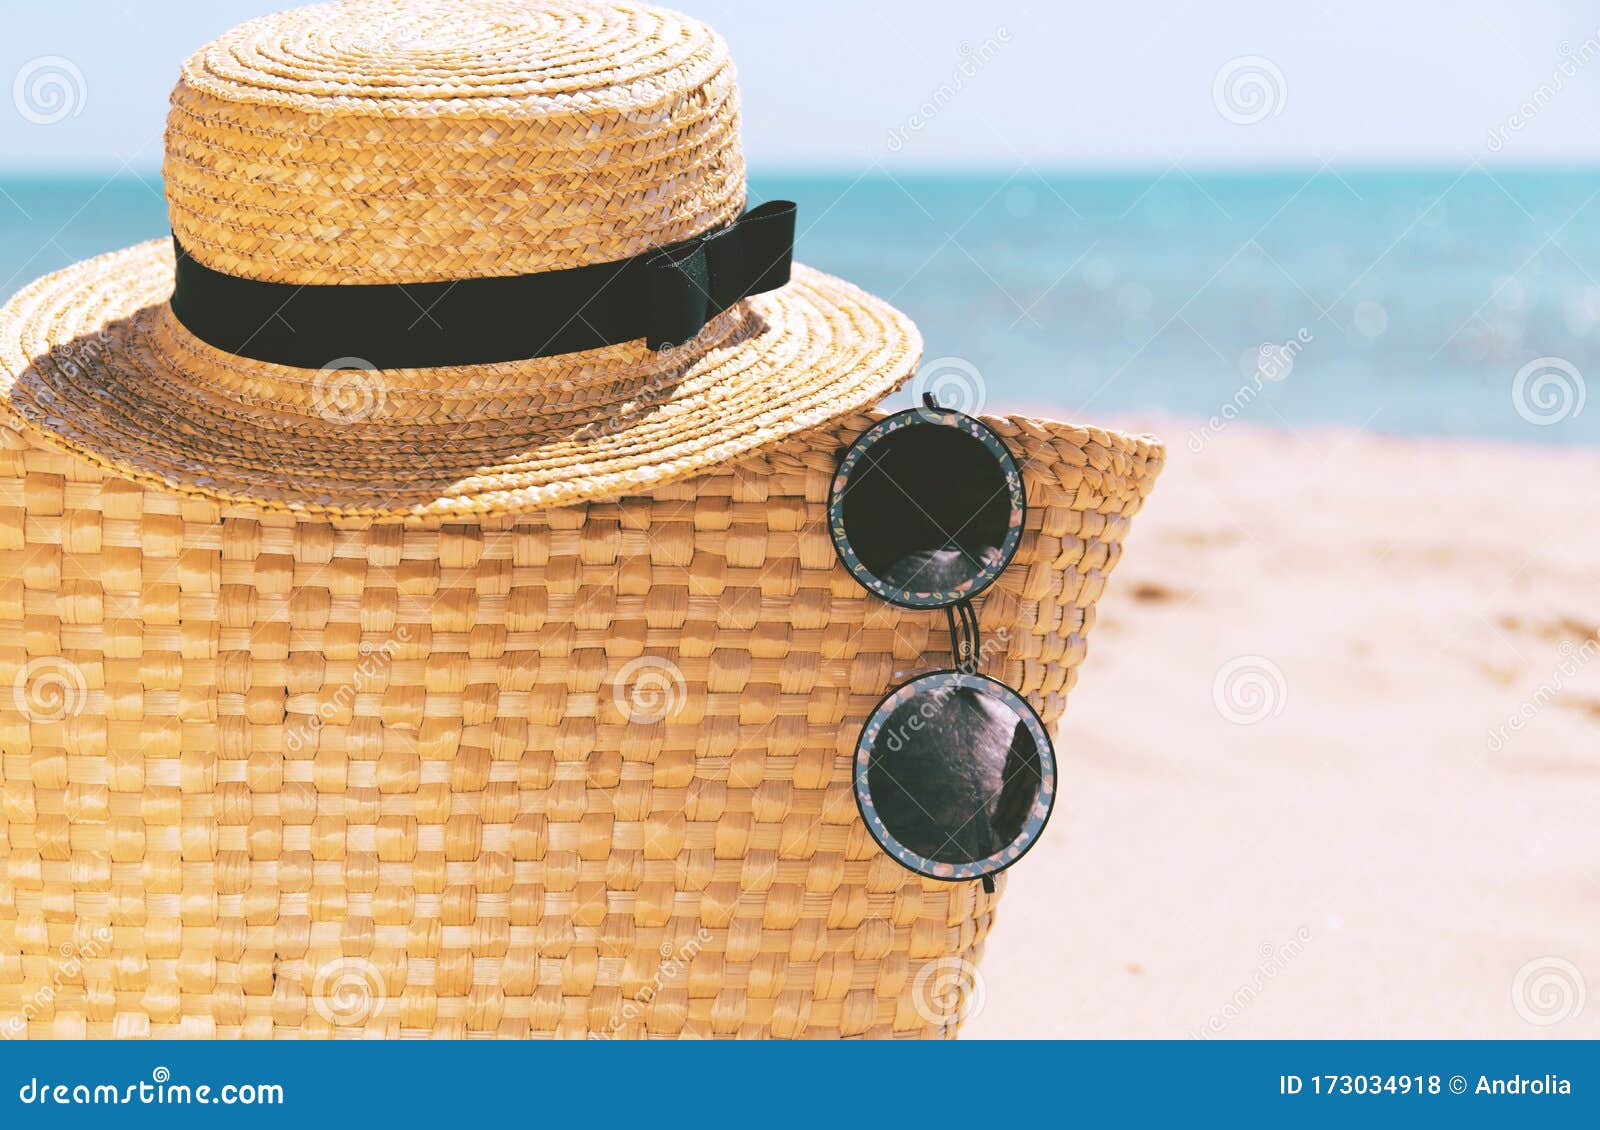 Straw Bag, Straw Hat, And Sunglasses With Sea Beach At Sunset Light As ...